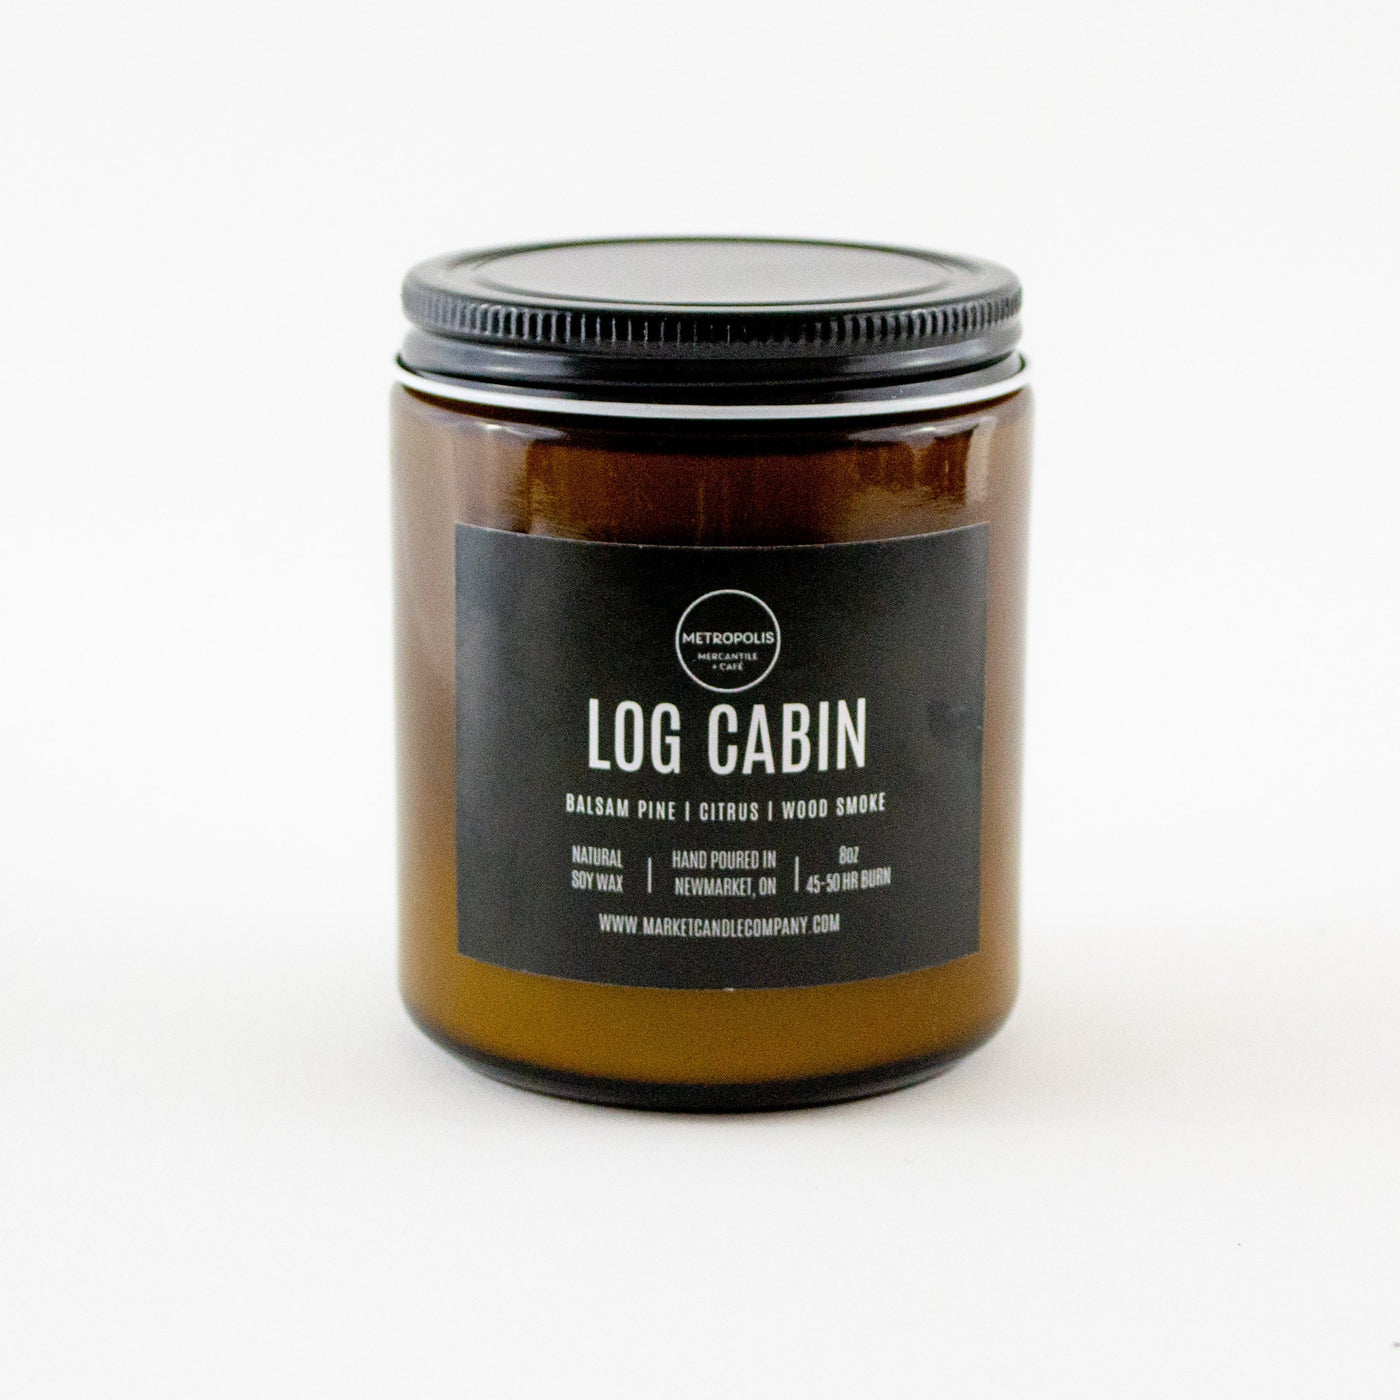 Log Cabin Candle - Market Candle Company